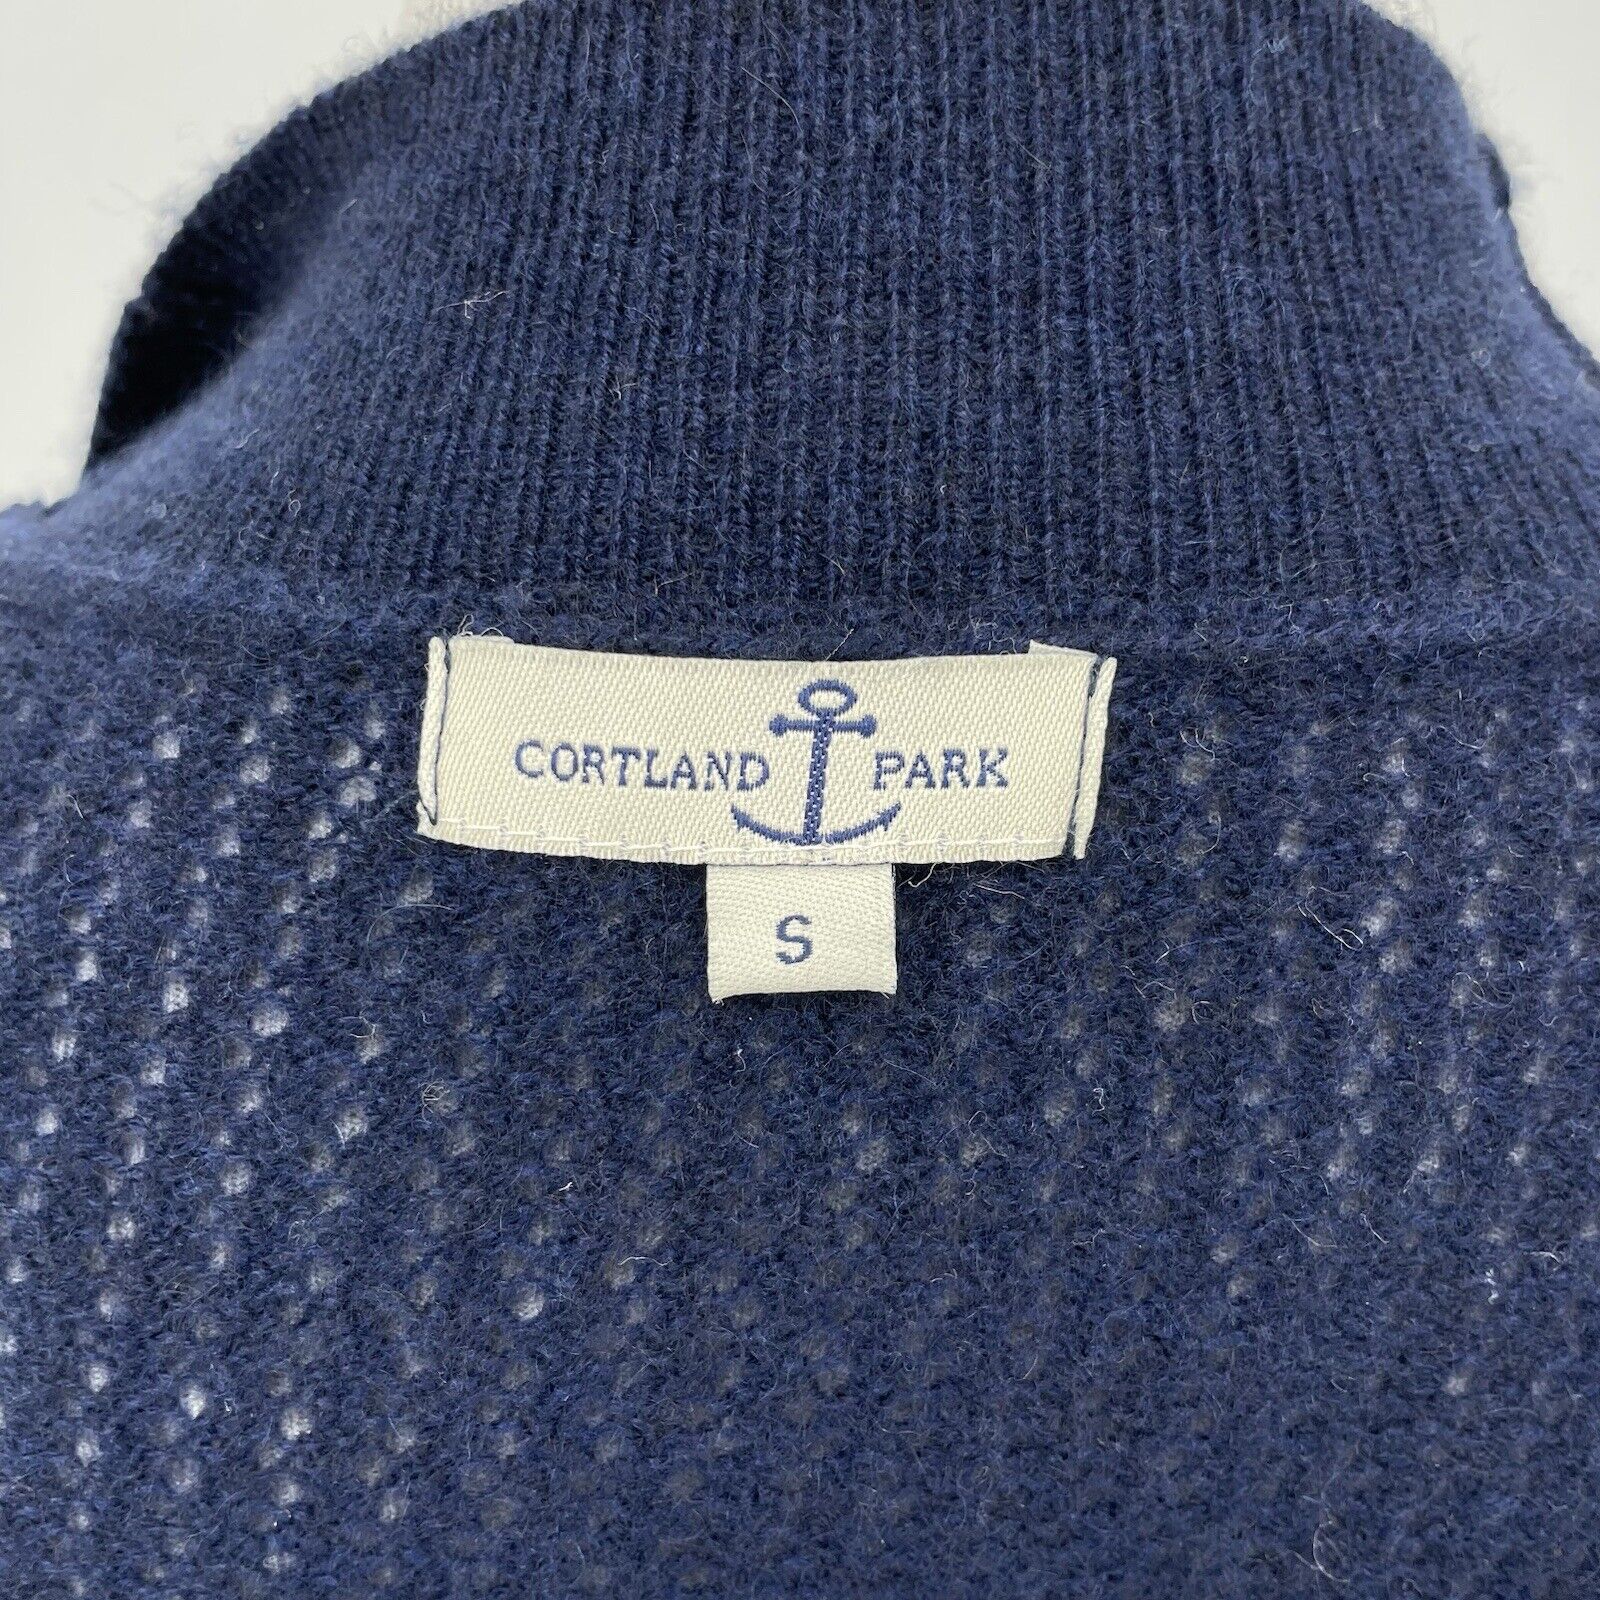 Cortland Park Small Cardigan Open Front 100% Cash… - image 5